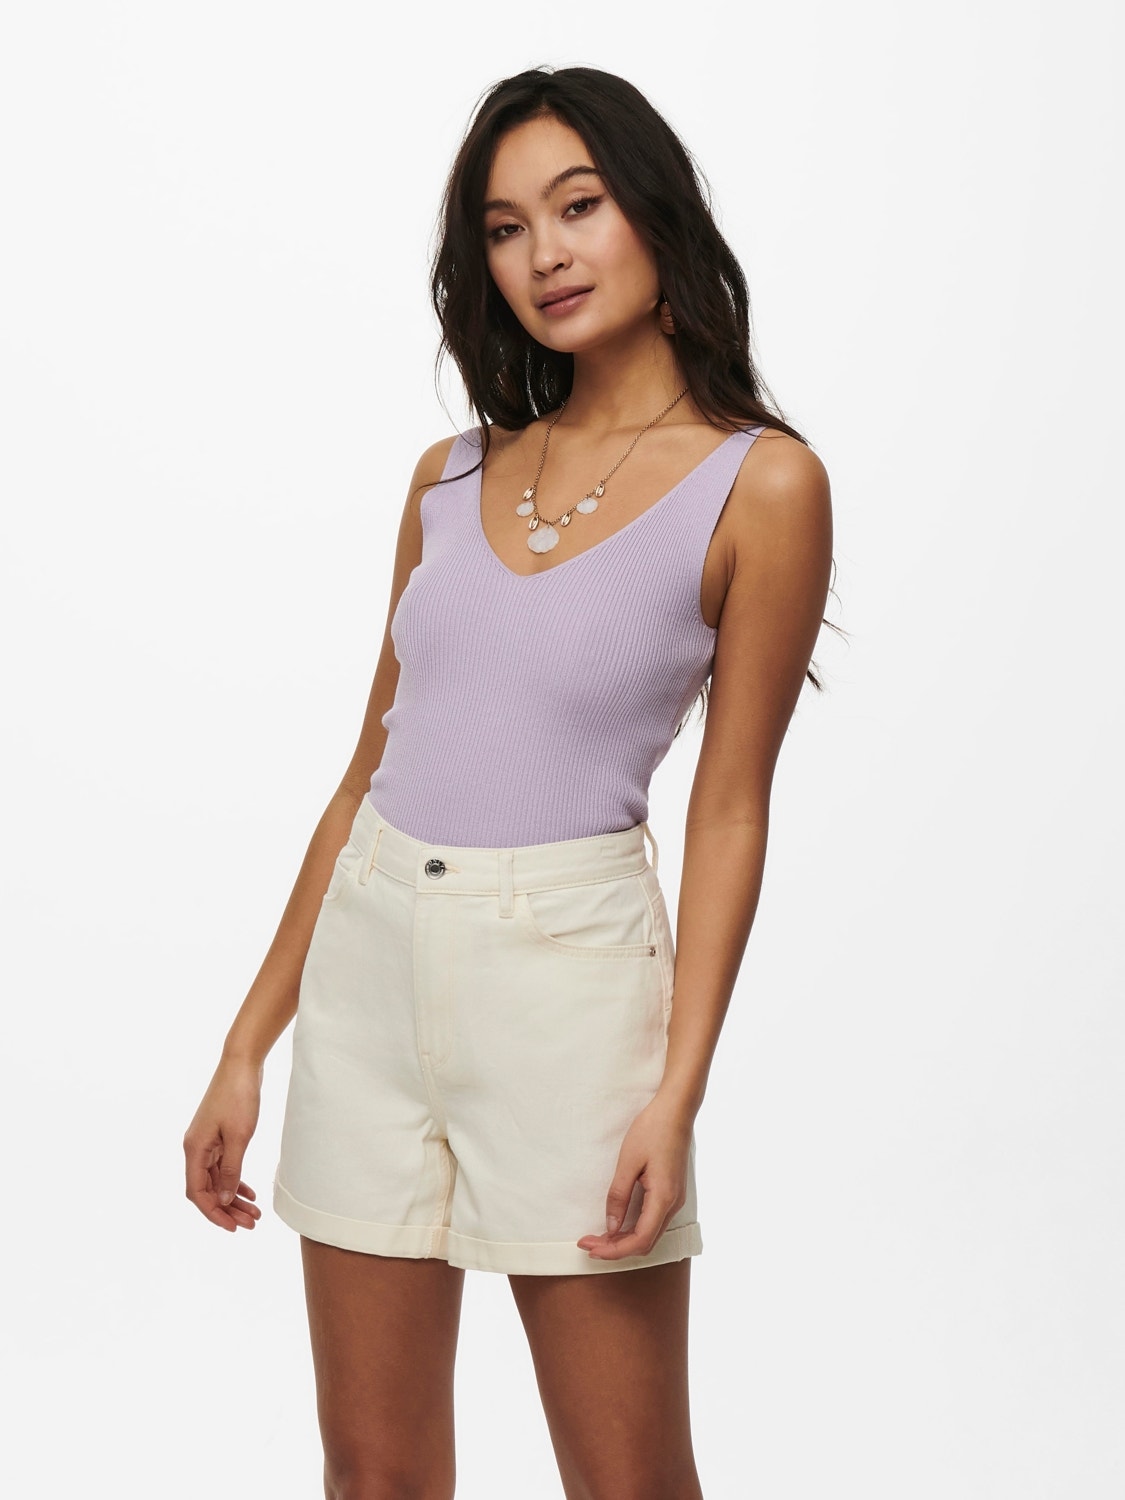 ONLY V-neck Top -Pastel Lilac - 15180497